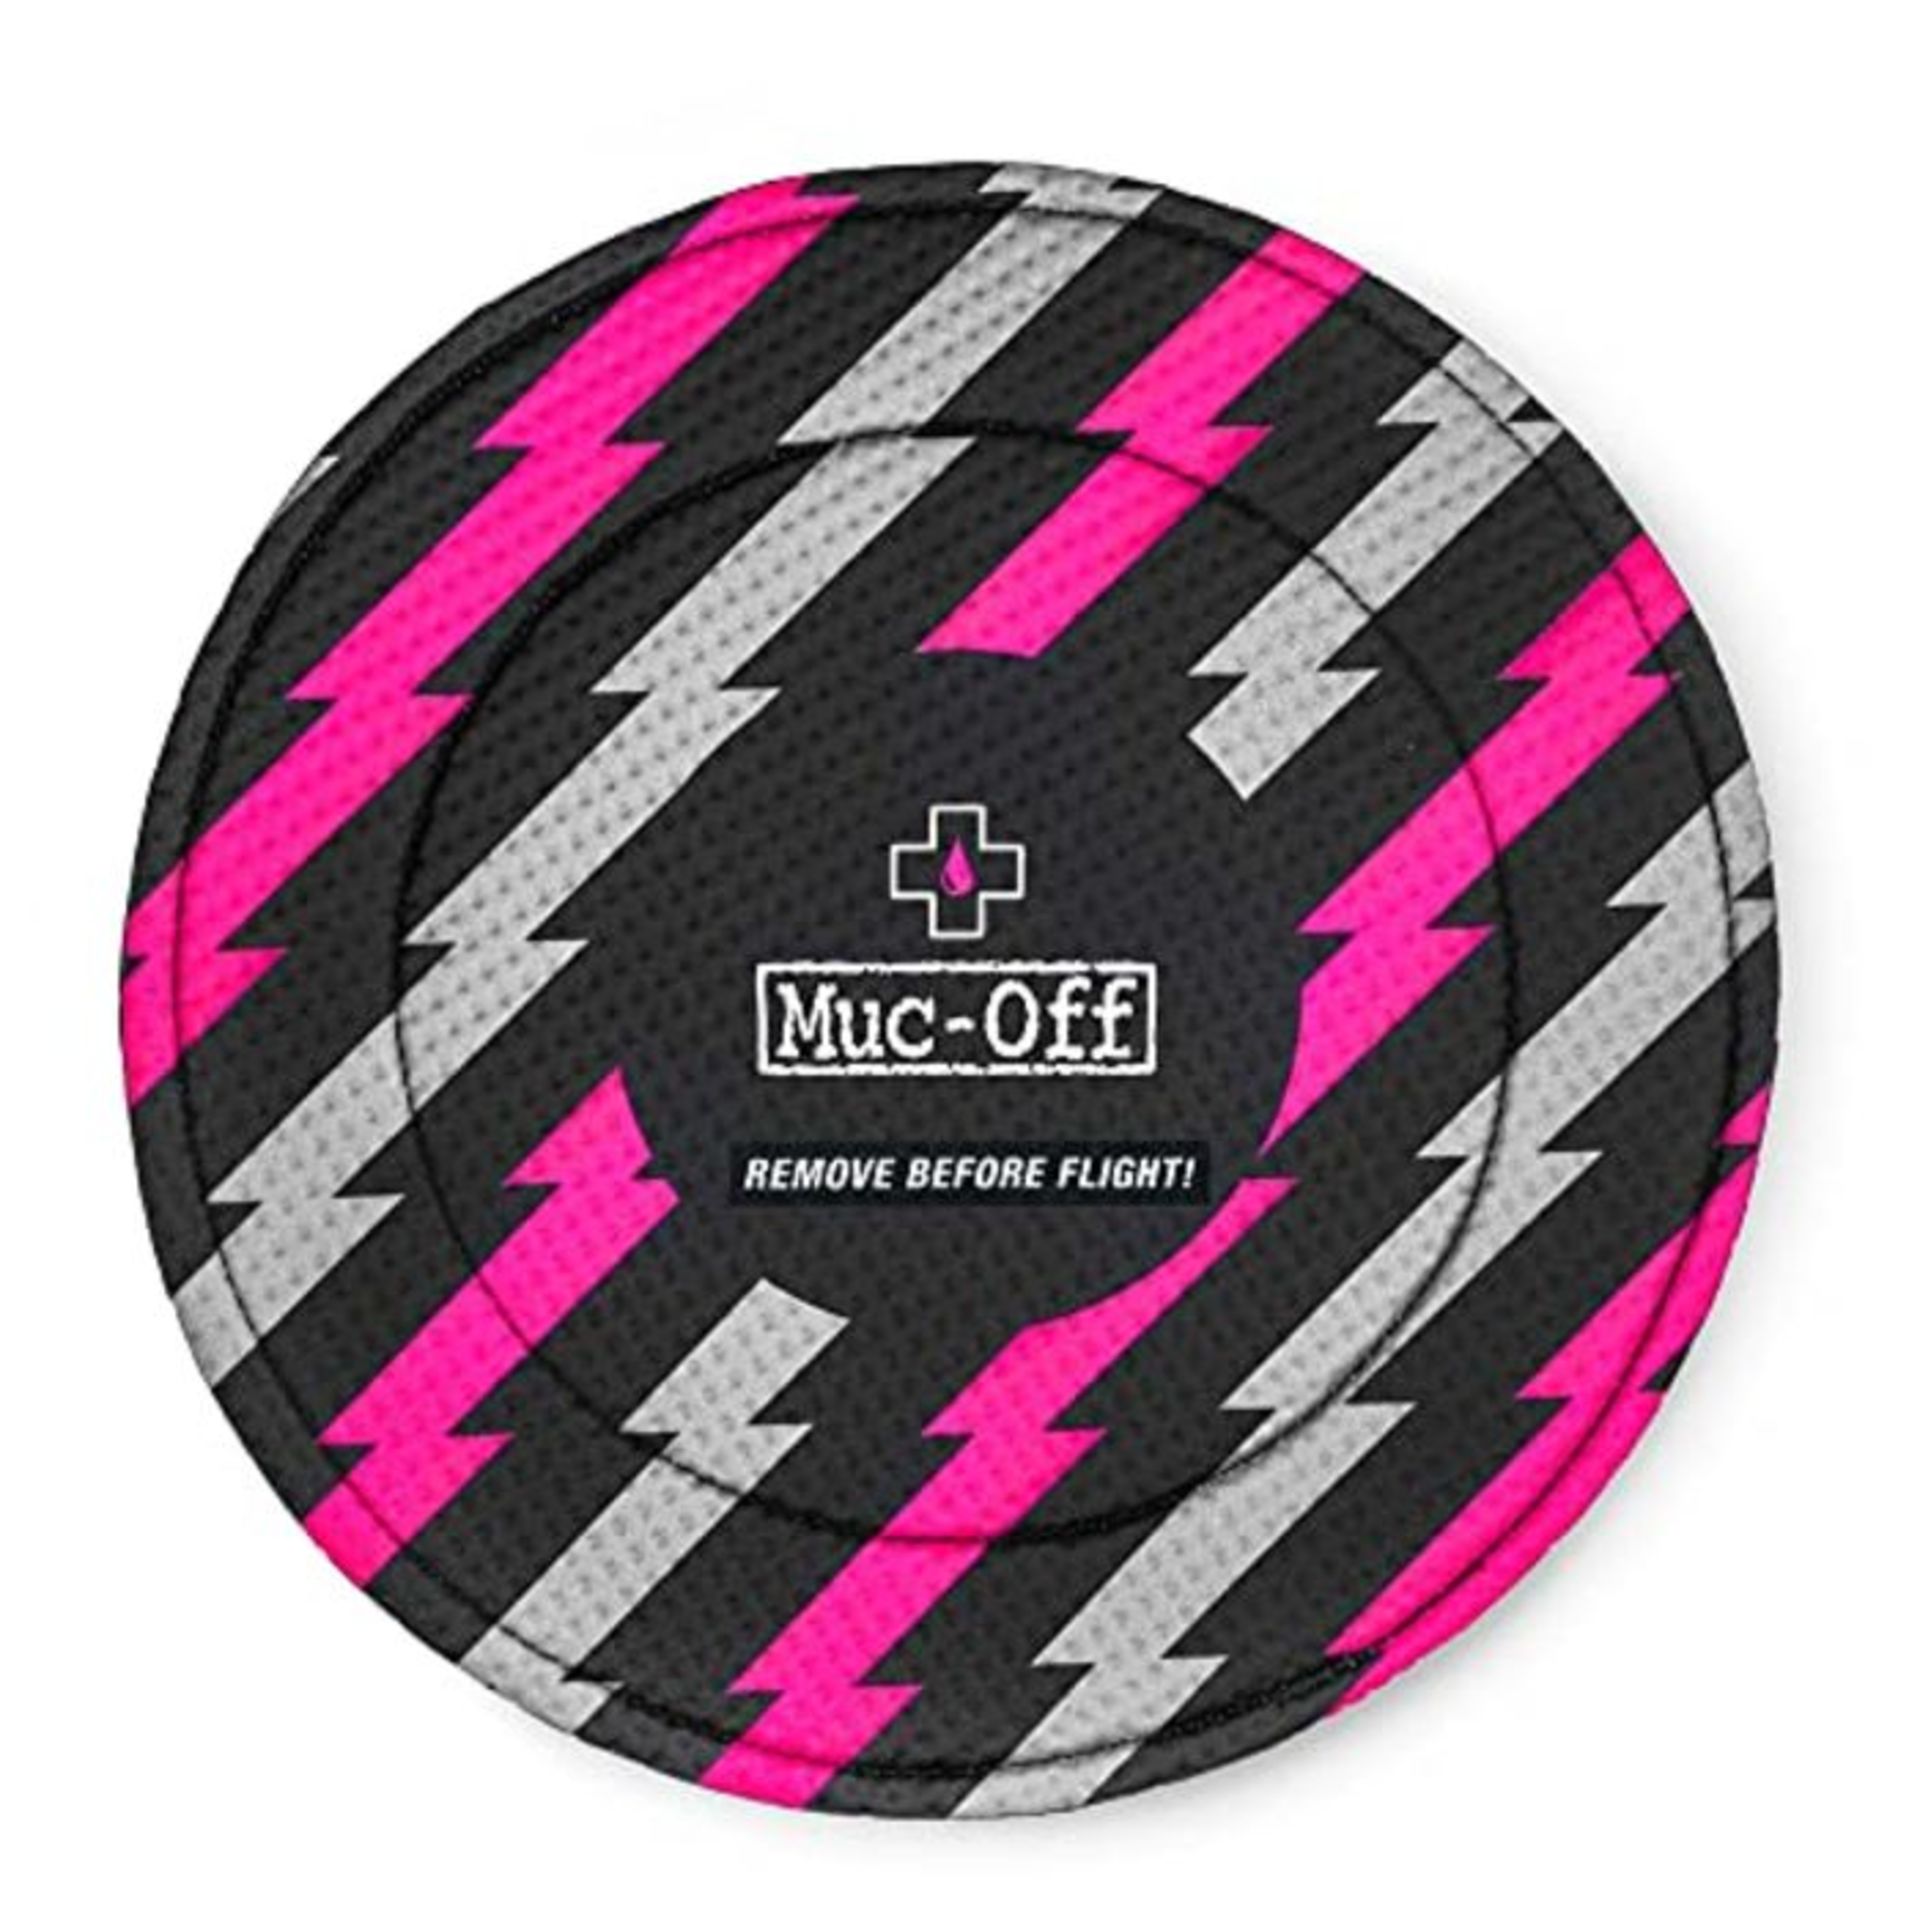 Muc-Off Bolt Disc Brake Covers, Set of 2 - Washable Neoprene Protective Covers for Bic - Image 3 of 4